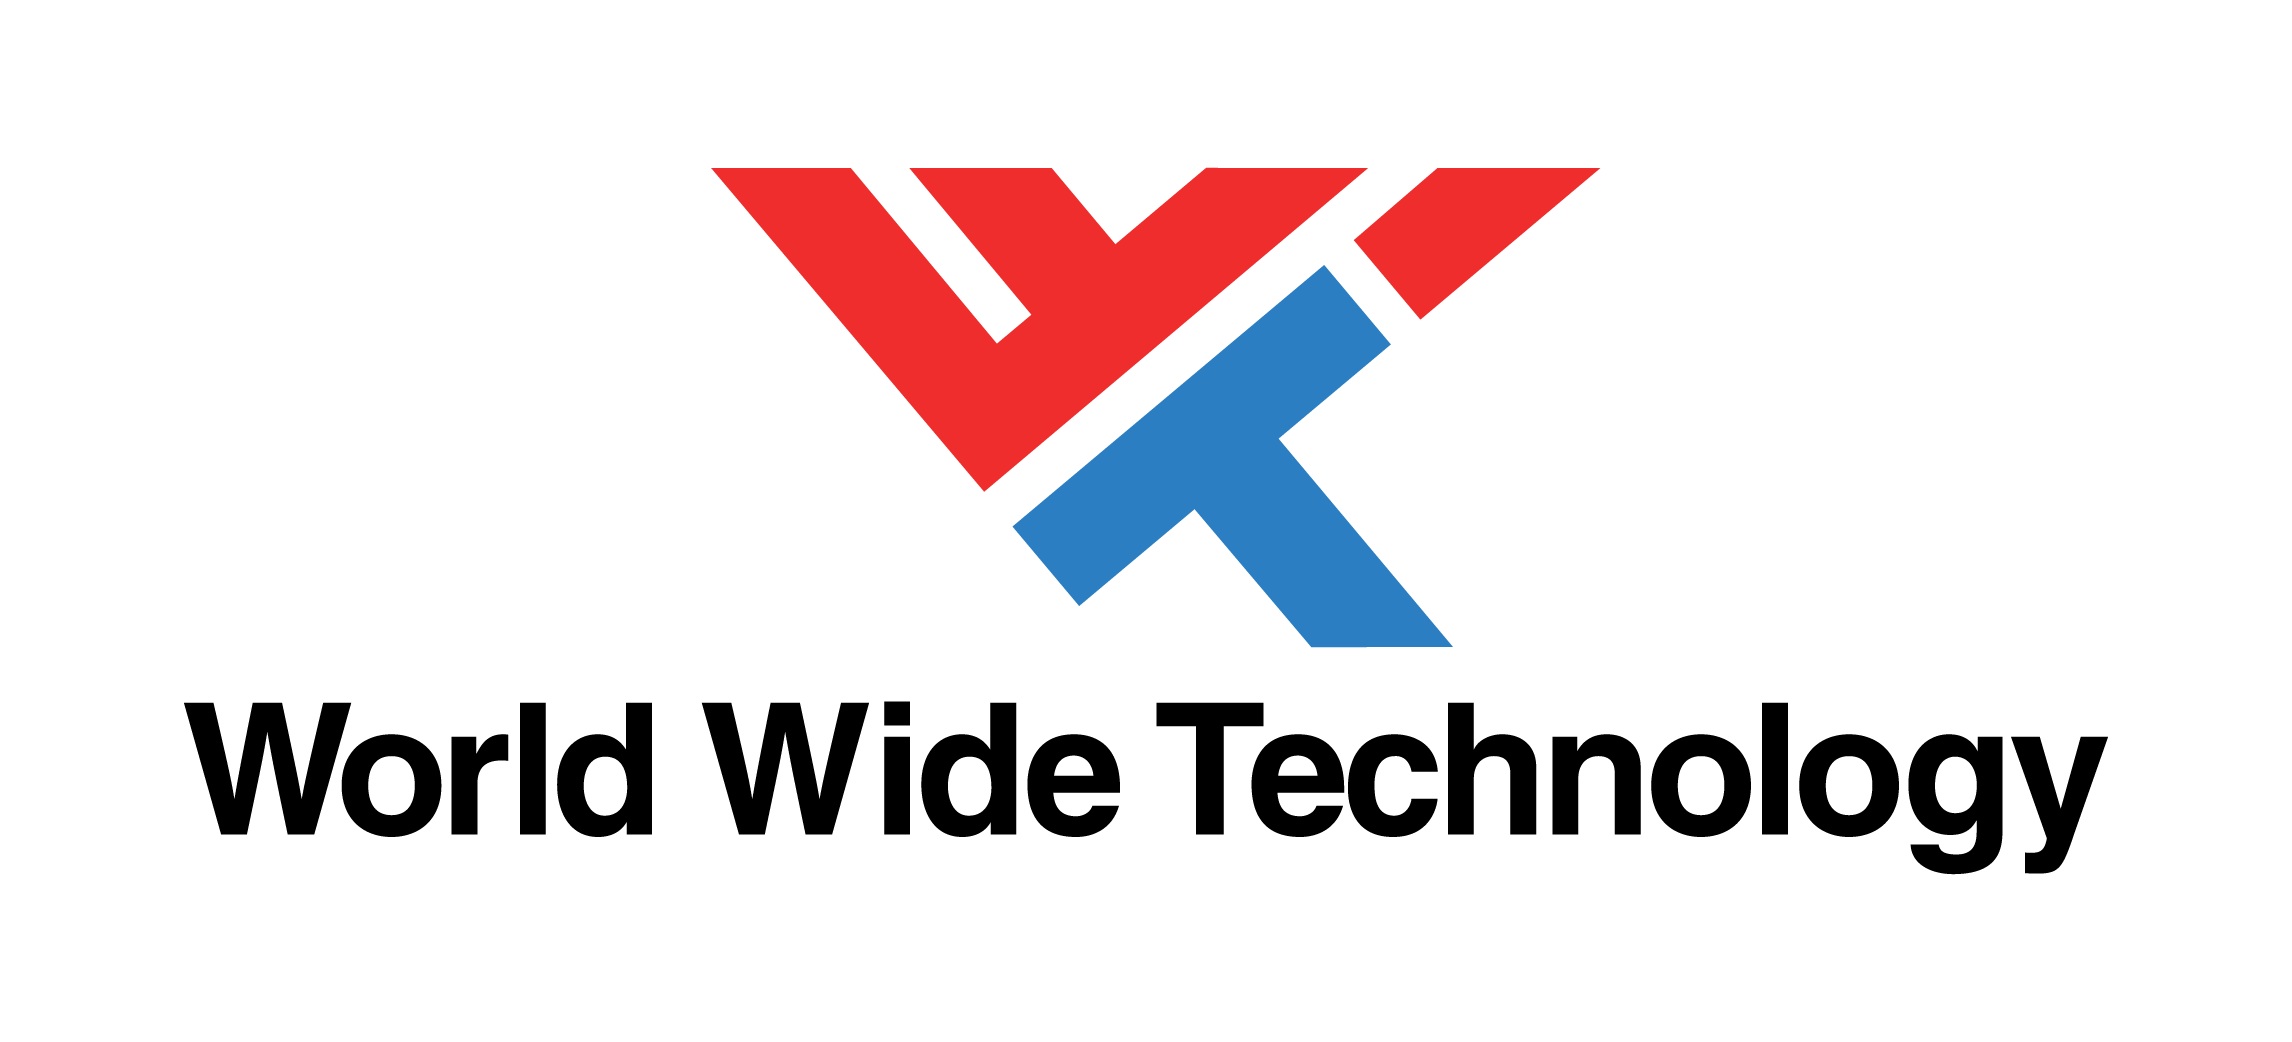 wwt-logo-color-stacked-high